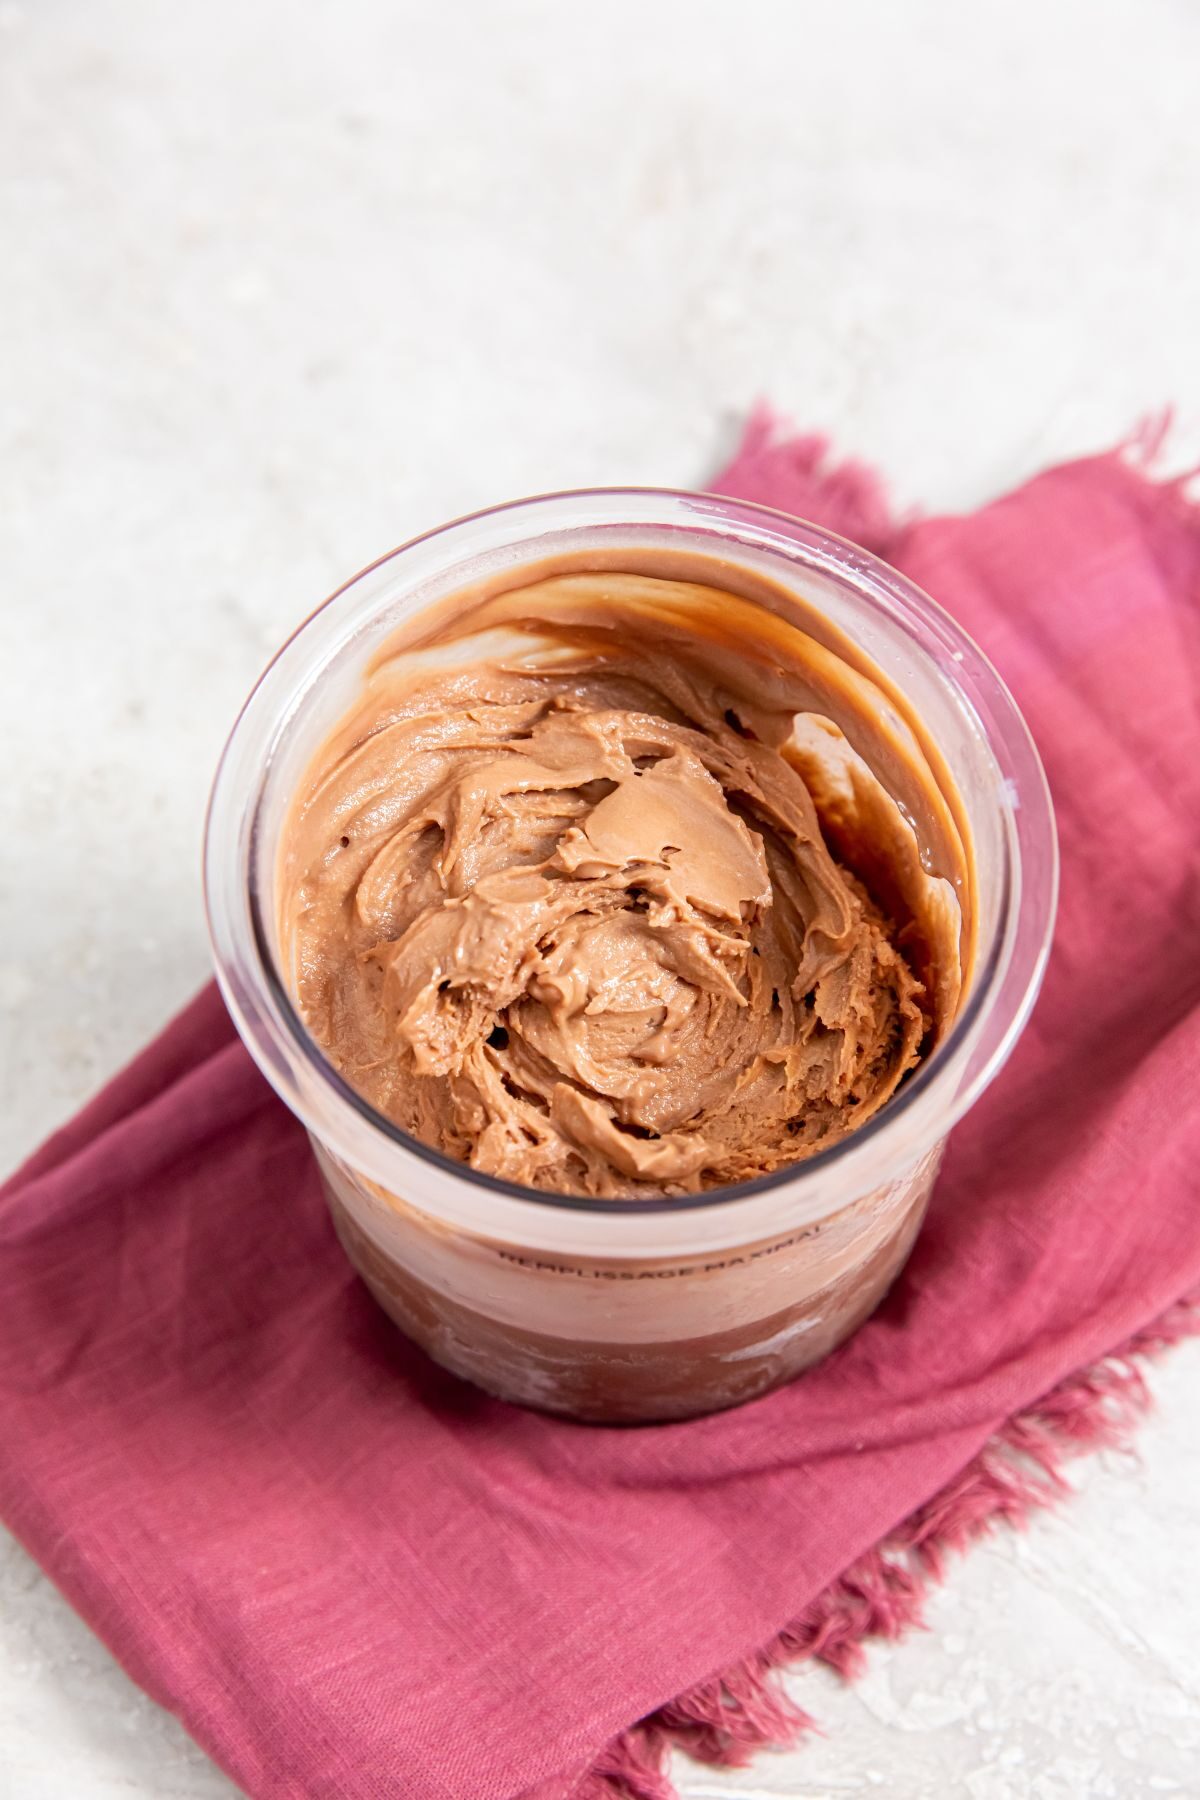 Chocolate protein ice cream in clear container on pink towel